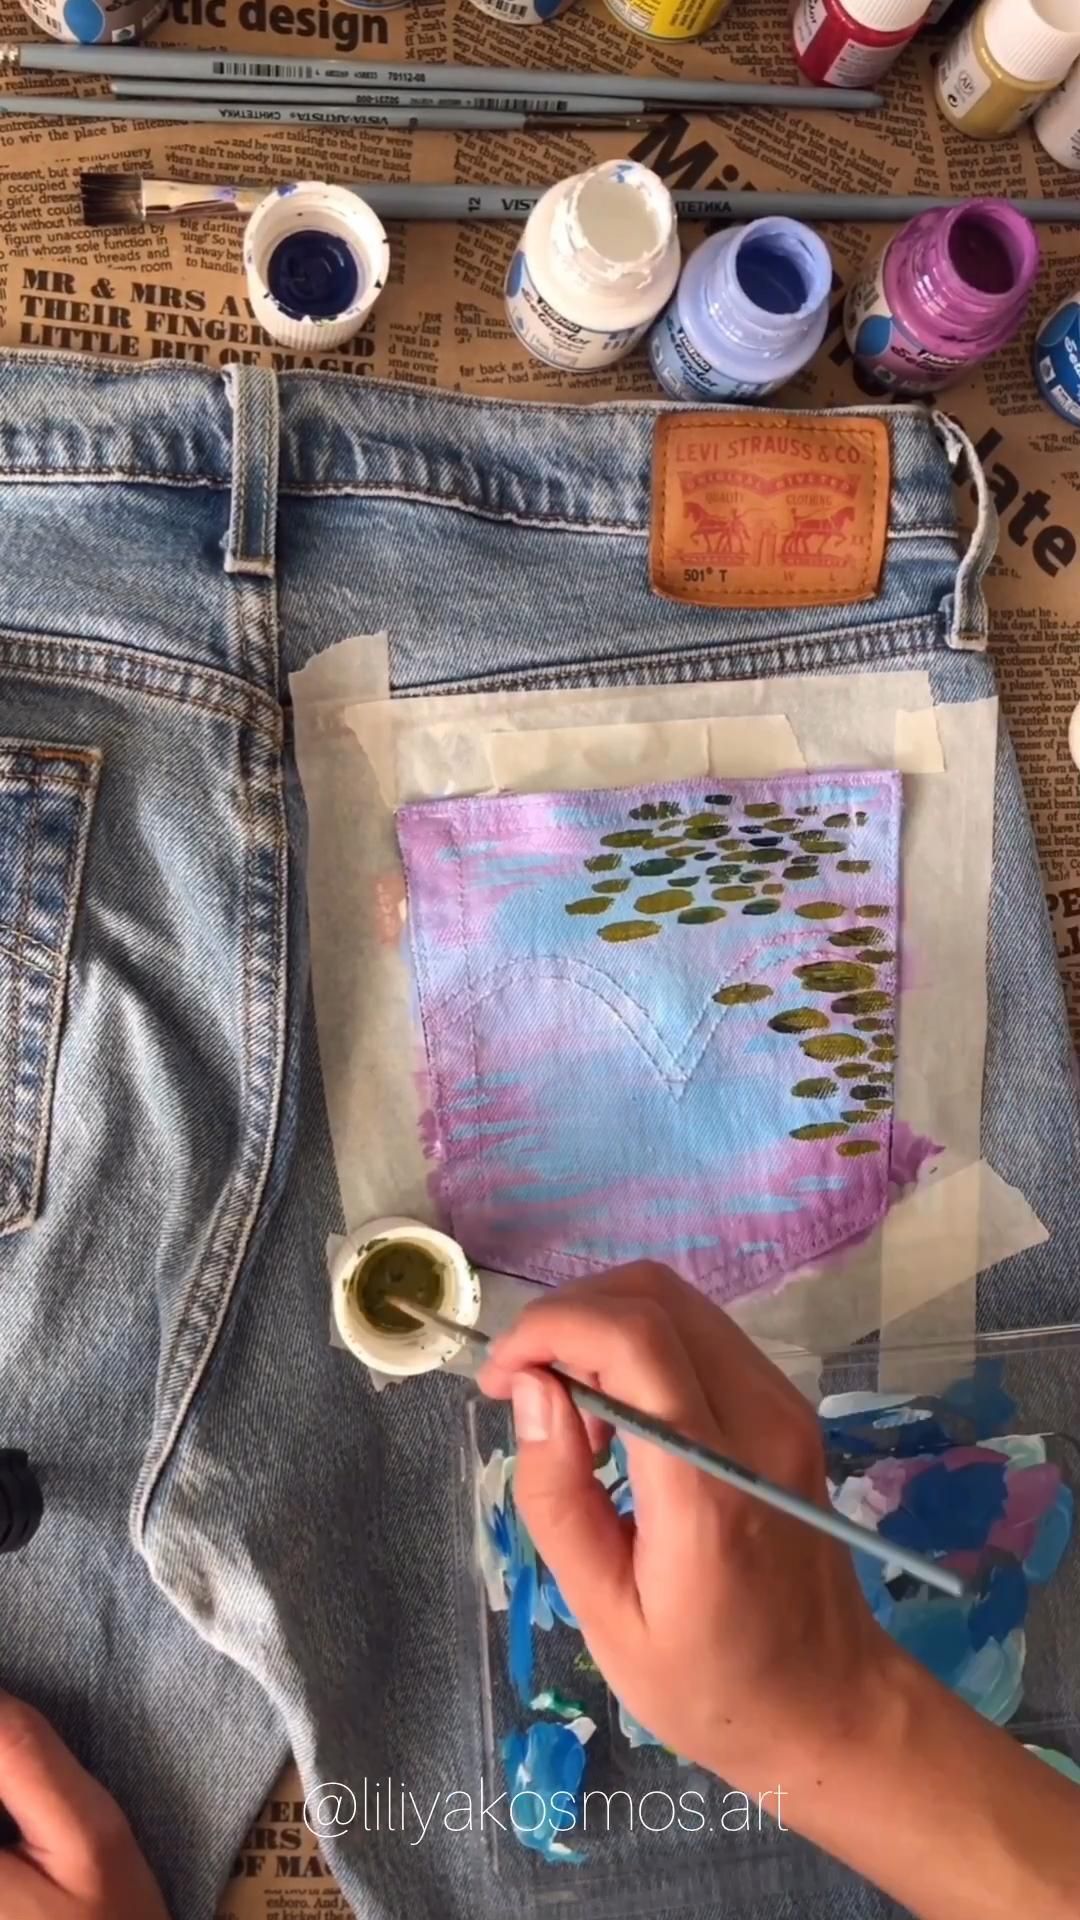 Hand painted jeans pocket Monet Waterlilies jean price Not | Etsy - Hand painted jeans pocket Monet Waterlilies jean price Not | Etsy -   18 diy Clothes crafts ideas